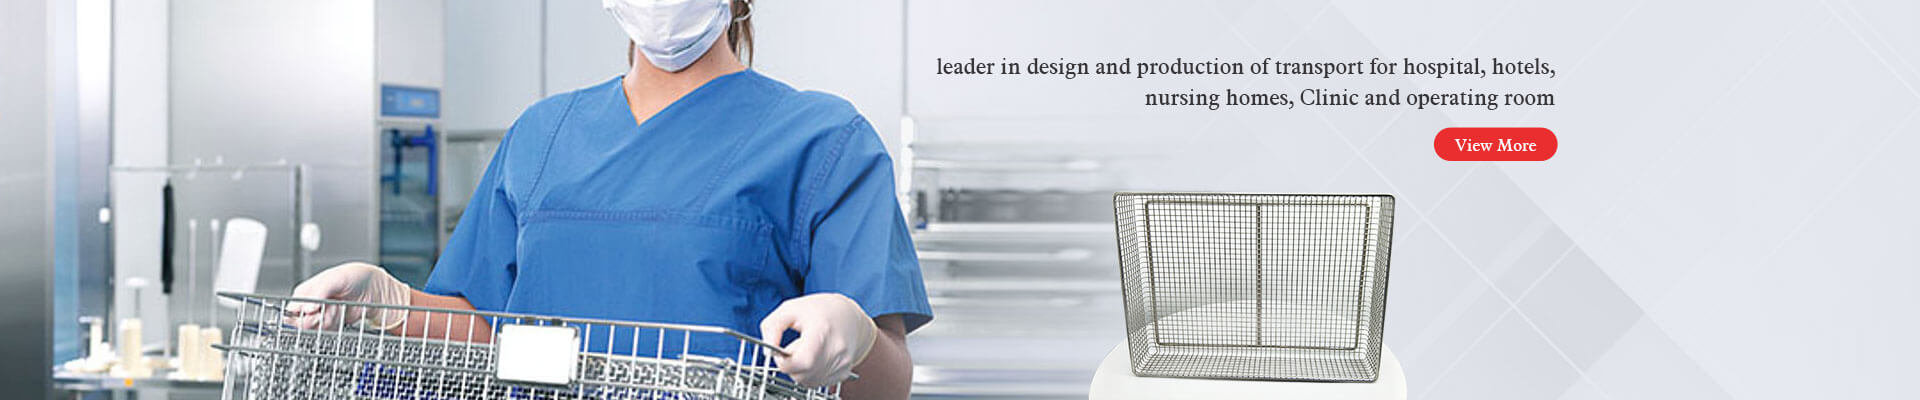 Stainless Steel Medical Disinfection Basket